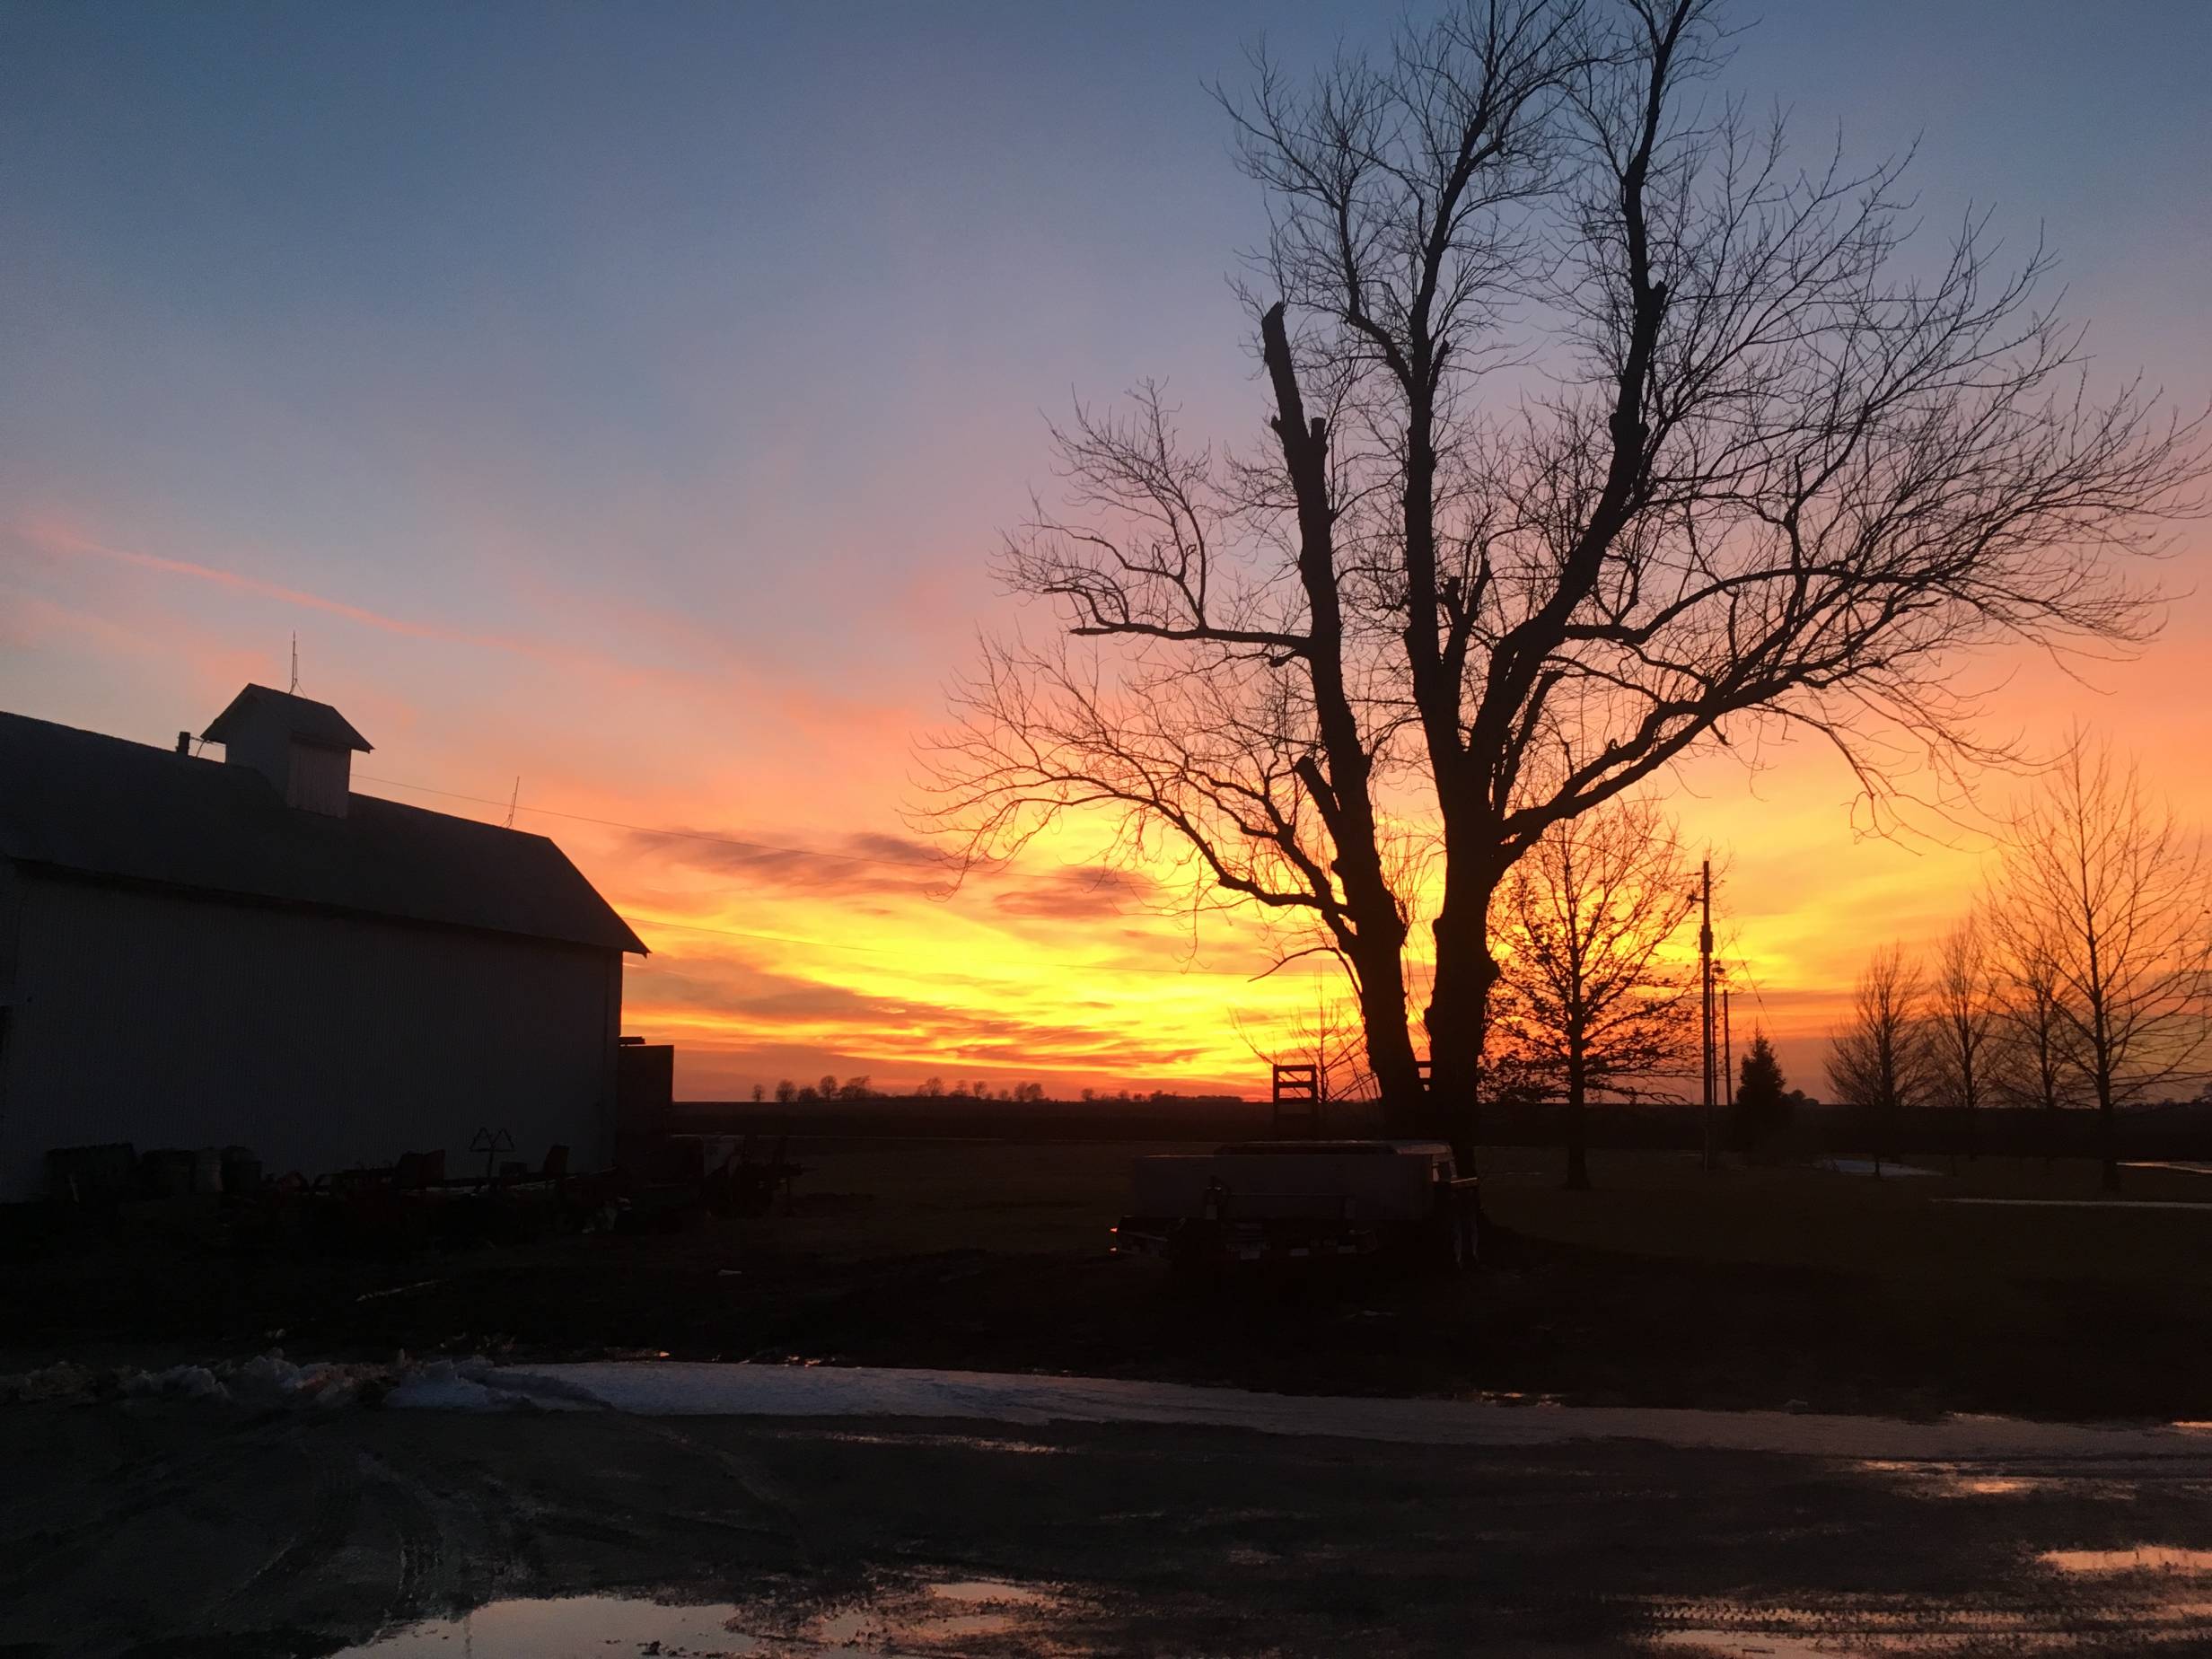 A view of the remarkable CU sunset alongside some Blue Moon Farm barns. 